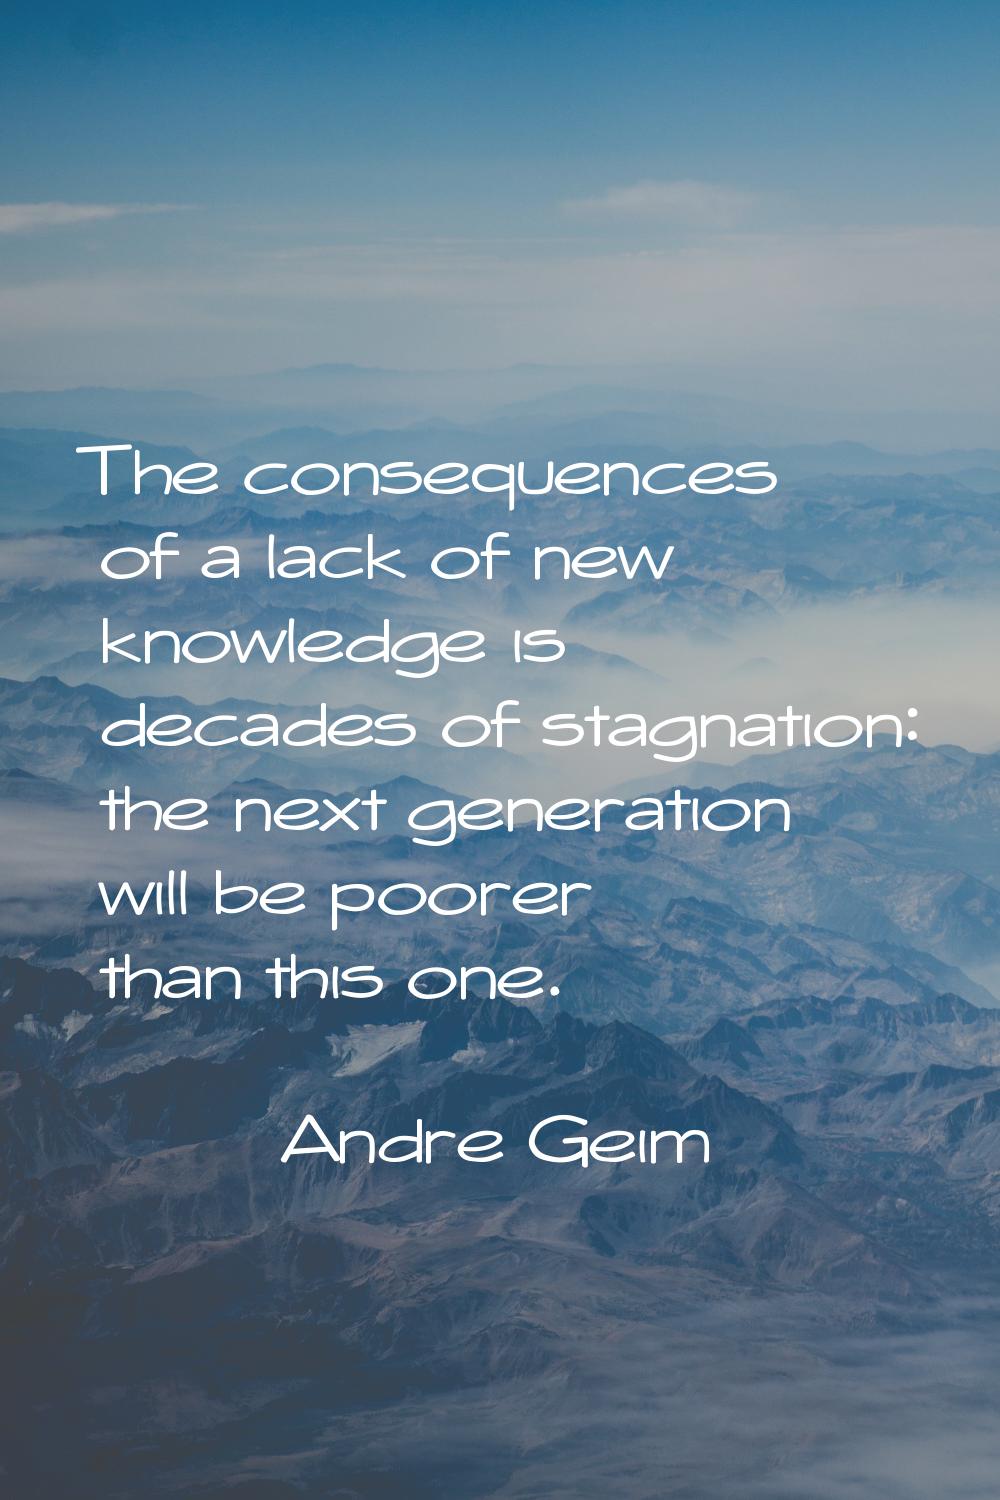 The consequences of a lack of new knowledge is decades of stagnation: the next generation will be p